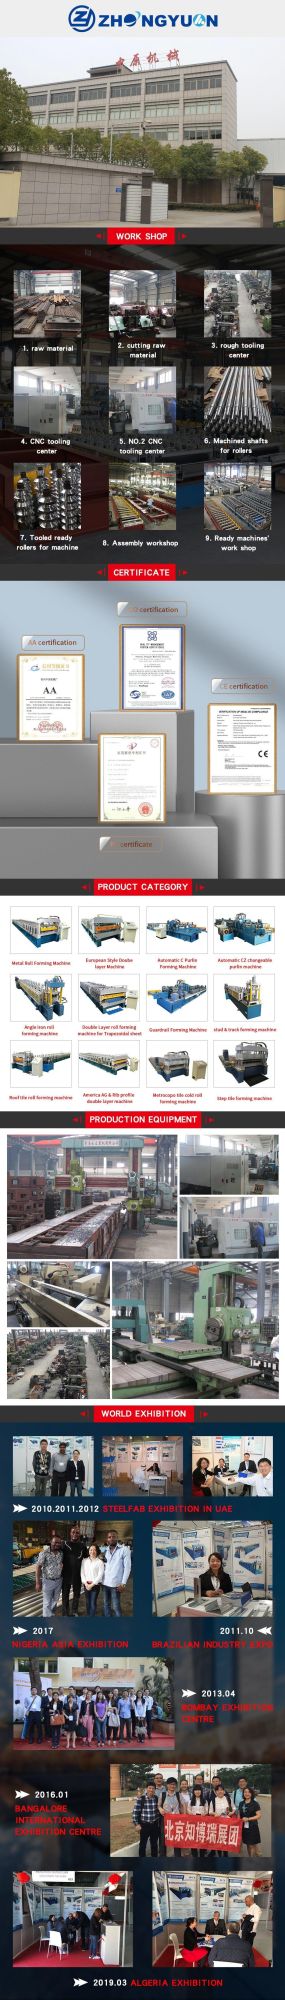 High Speed Strong Galvanized Steel Coils Steel CZ Purlin Forming Machine Purlin Roll Forming Machine with ISO9001 Quality Certificate